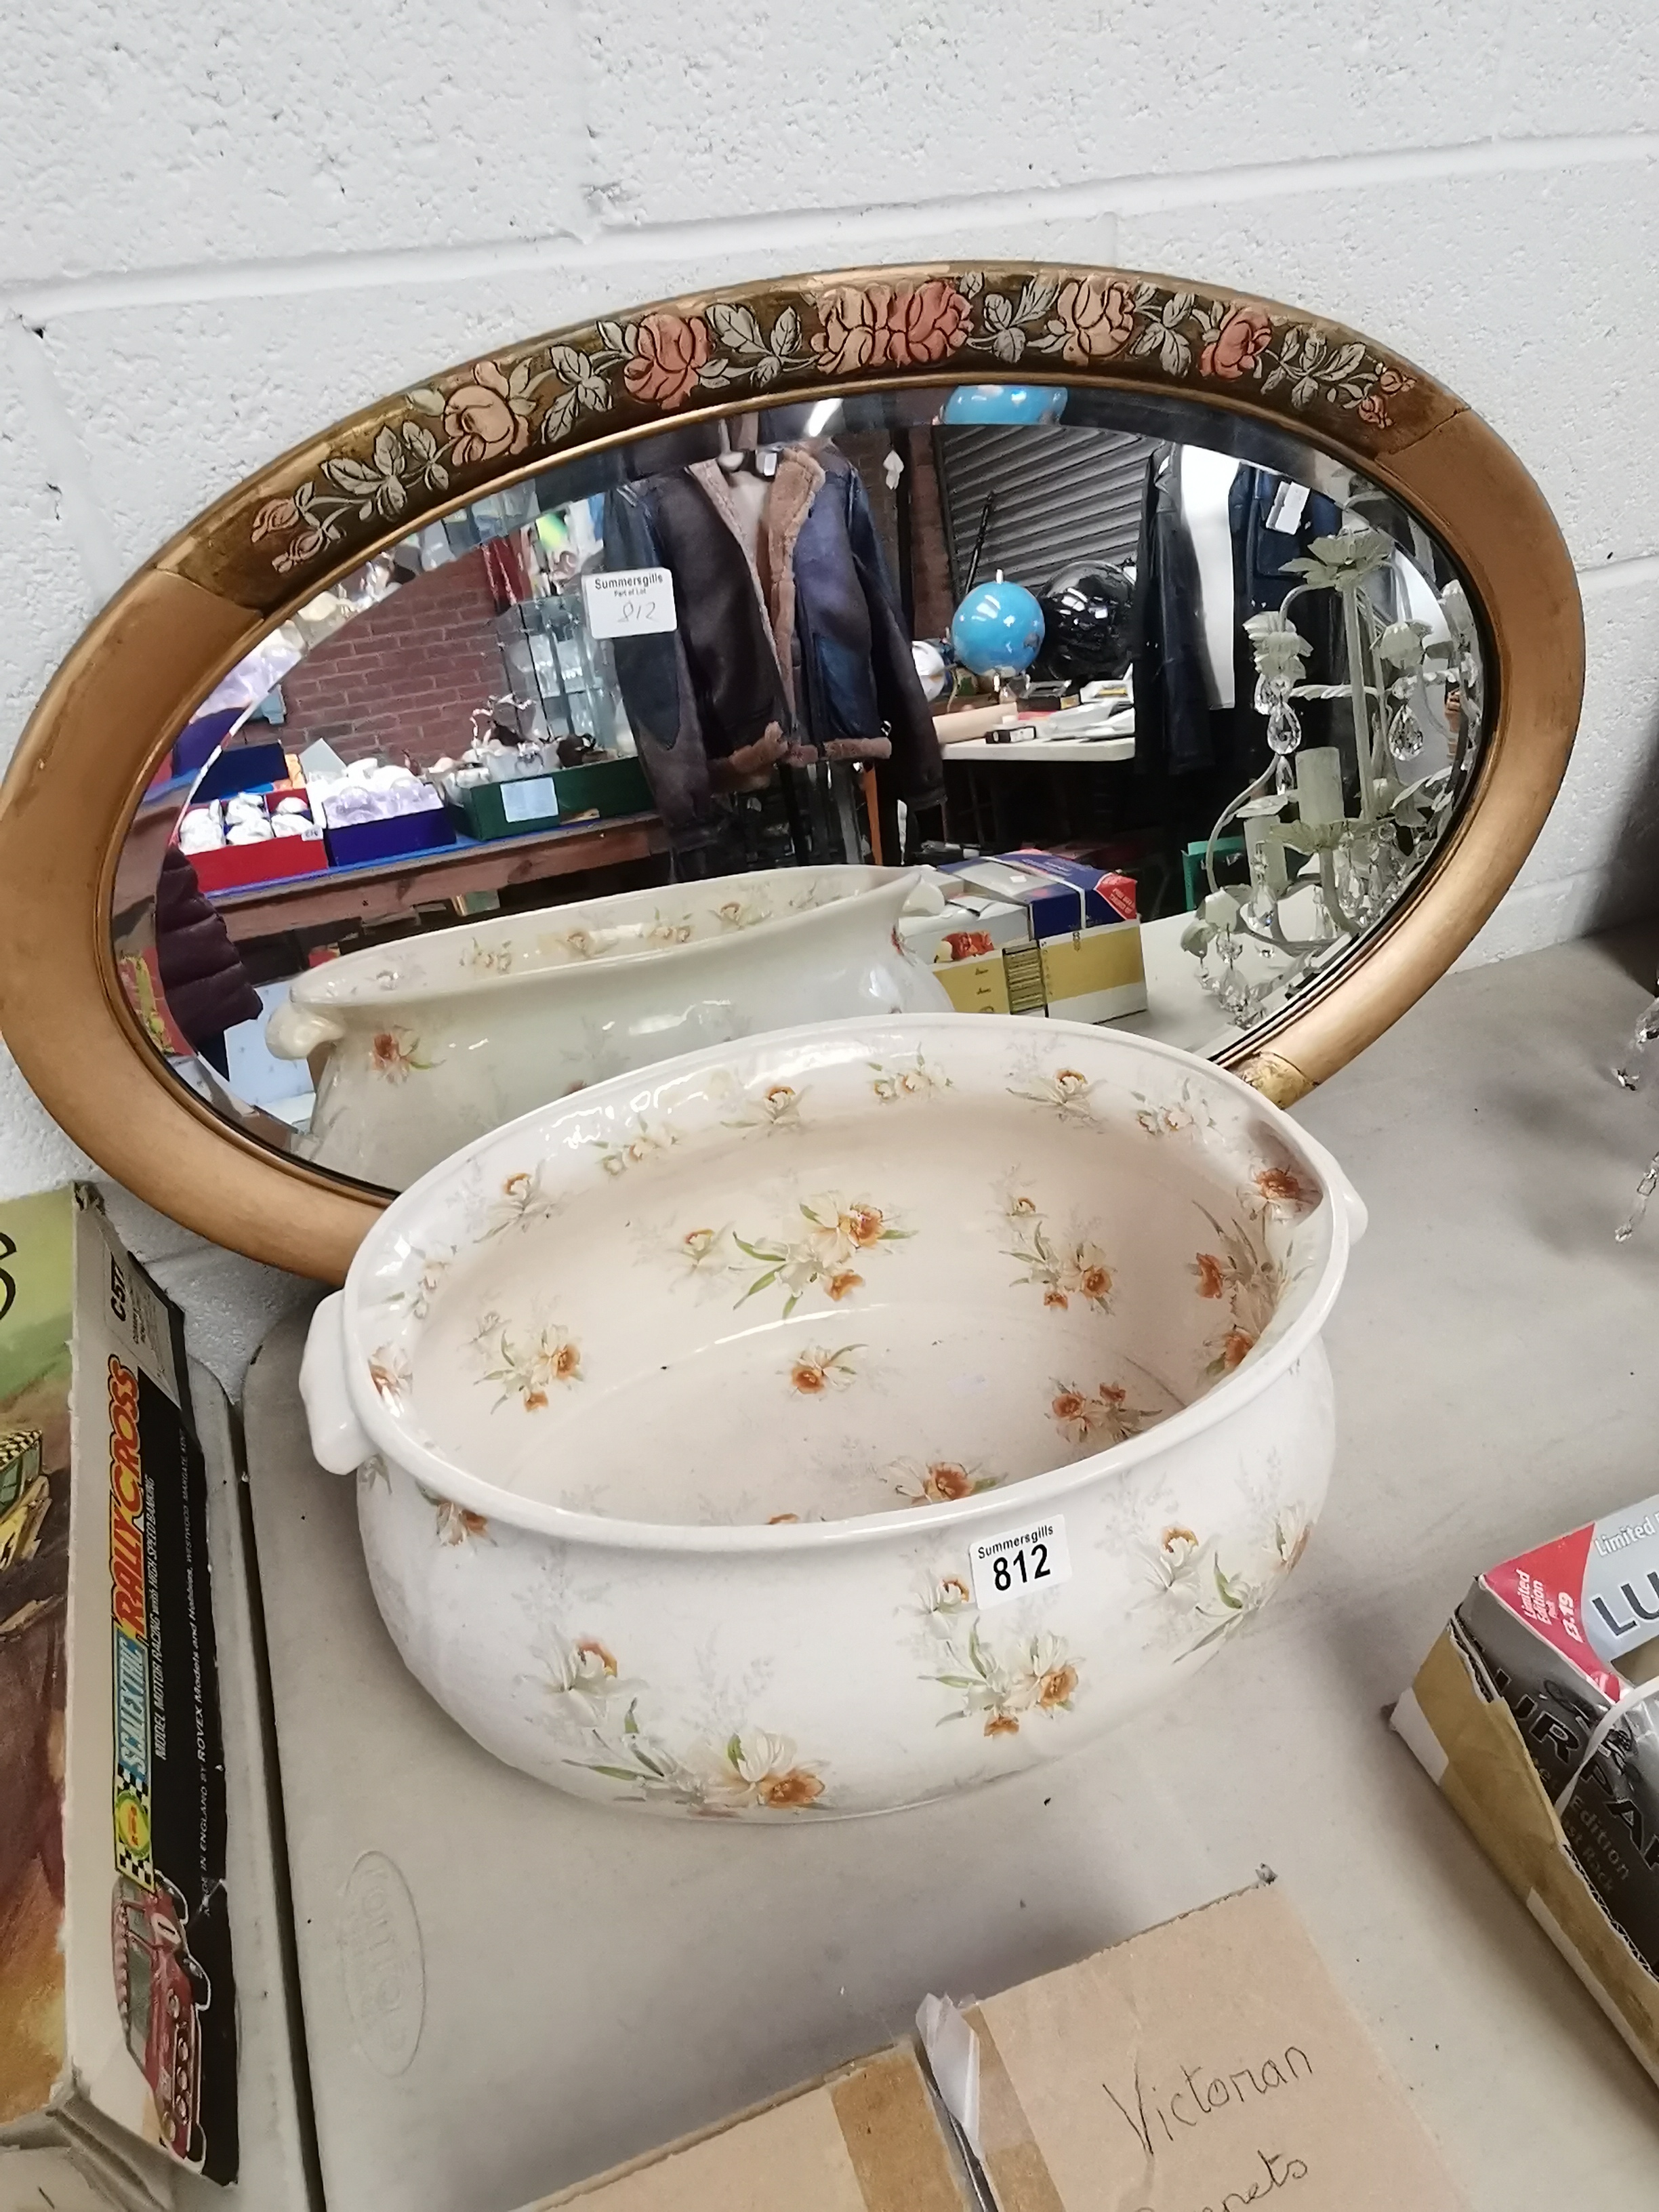 Ornate oval mirror and ironware foot bath - Image 2 of 4